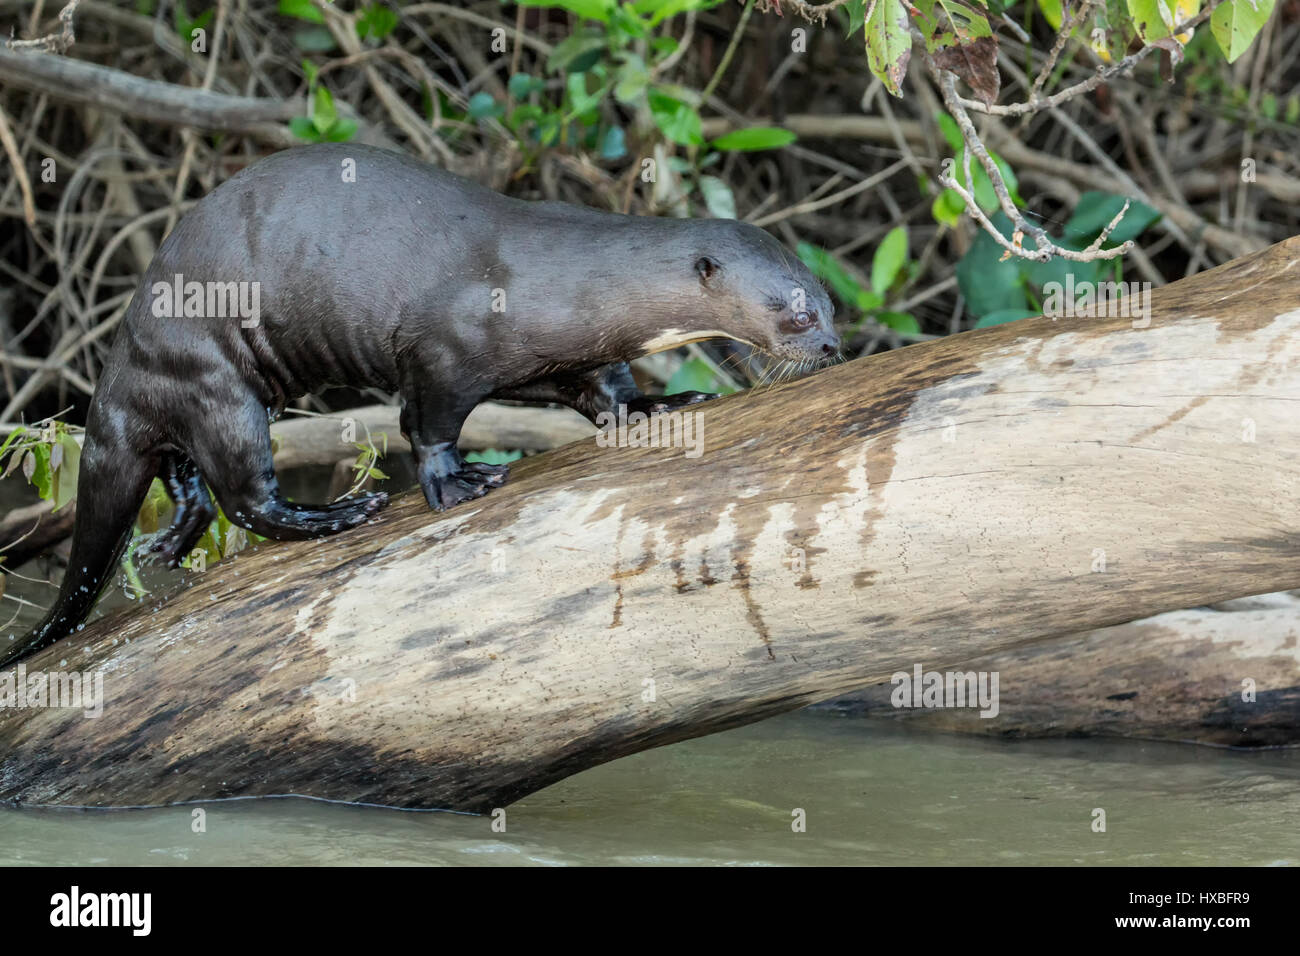 Giant River Otter on a log along the riverbank of the Cuiaba River in the Pantanal region, Mato Grosso, Brazil, South America Stock Photo